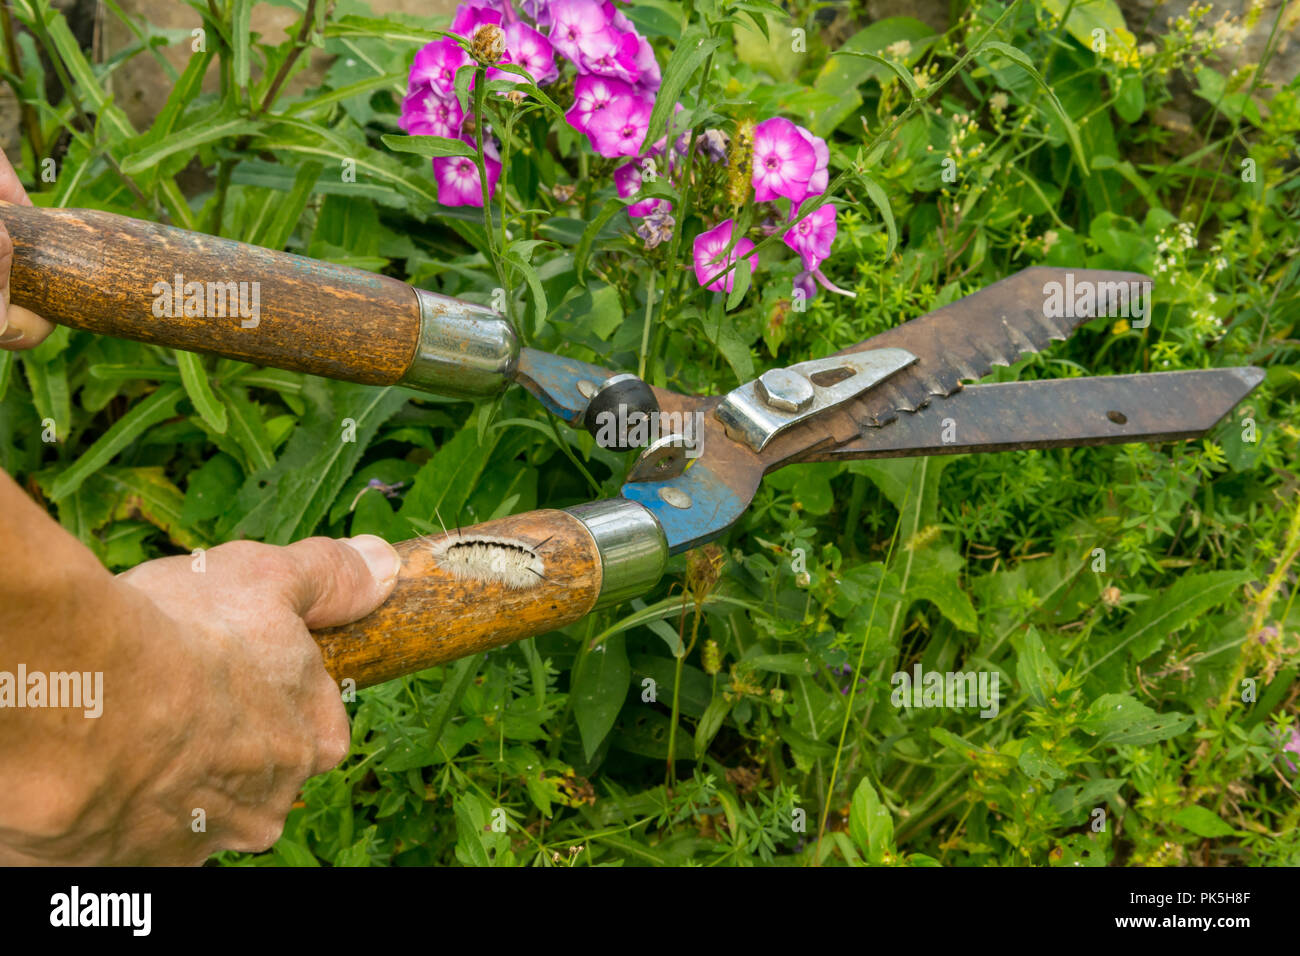 Hidden Dangers of Gardening.  A woman about to be stung by a Hickory Tussock Caterpillar while cutting weeds in the garden. Stock Photo